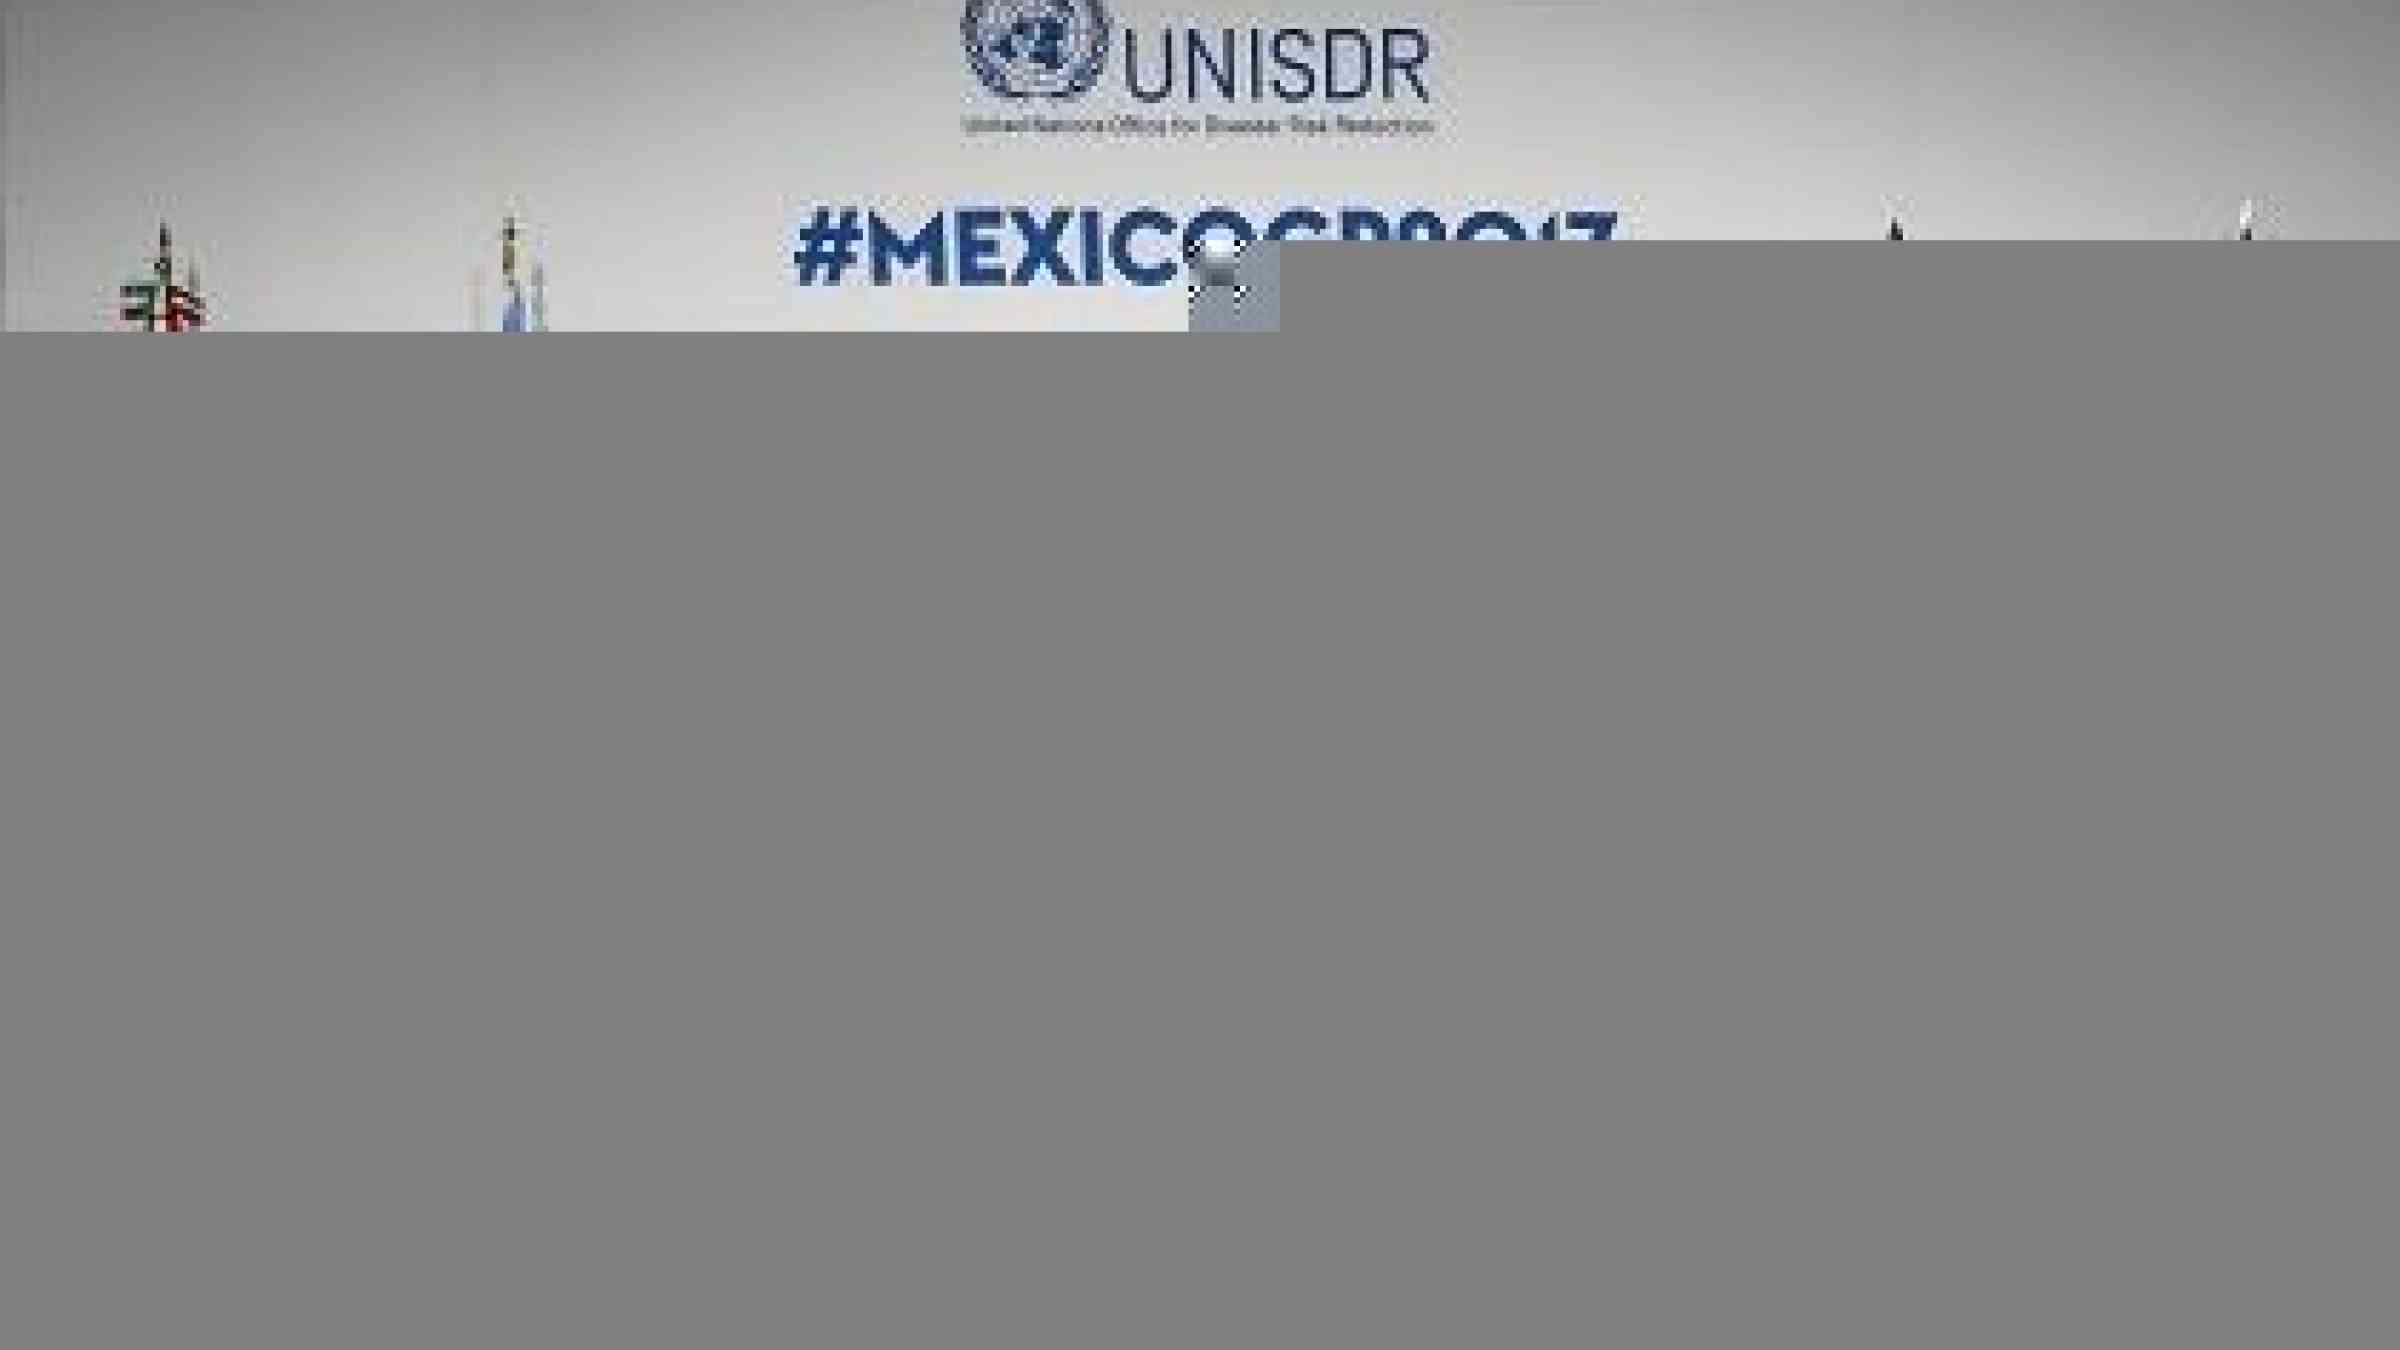 UN Deputy Secretary-General Amina J. Mohammed and UNISDR head Robert Glasser last met at the Global Platform in Cancun, and both spoke this week at a special ECOSOC session on disaster resilience